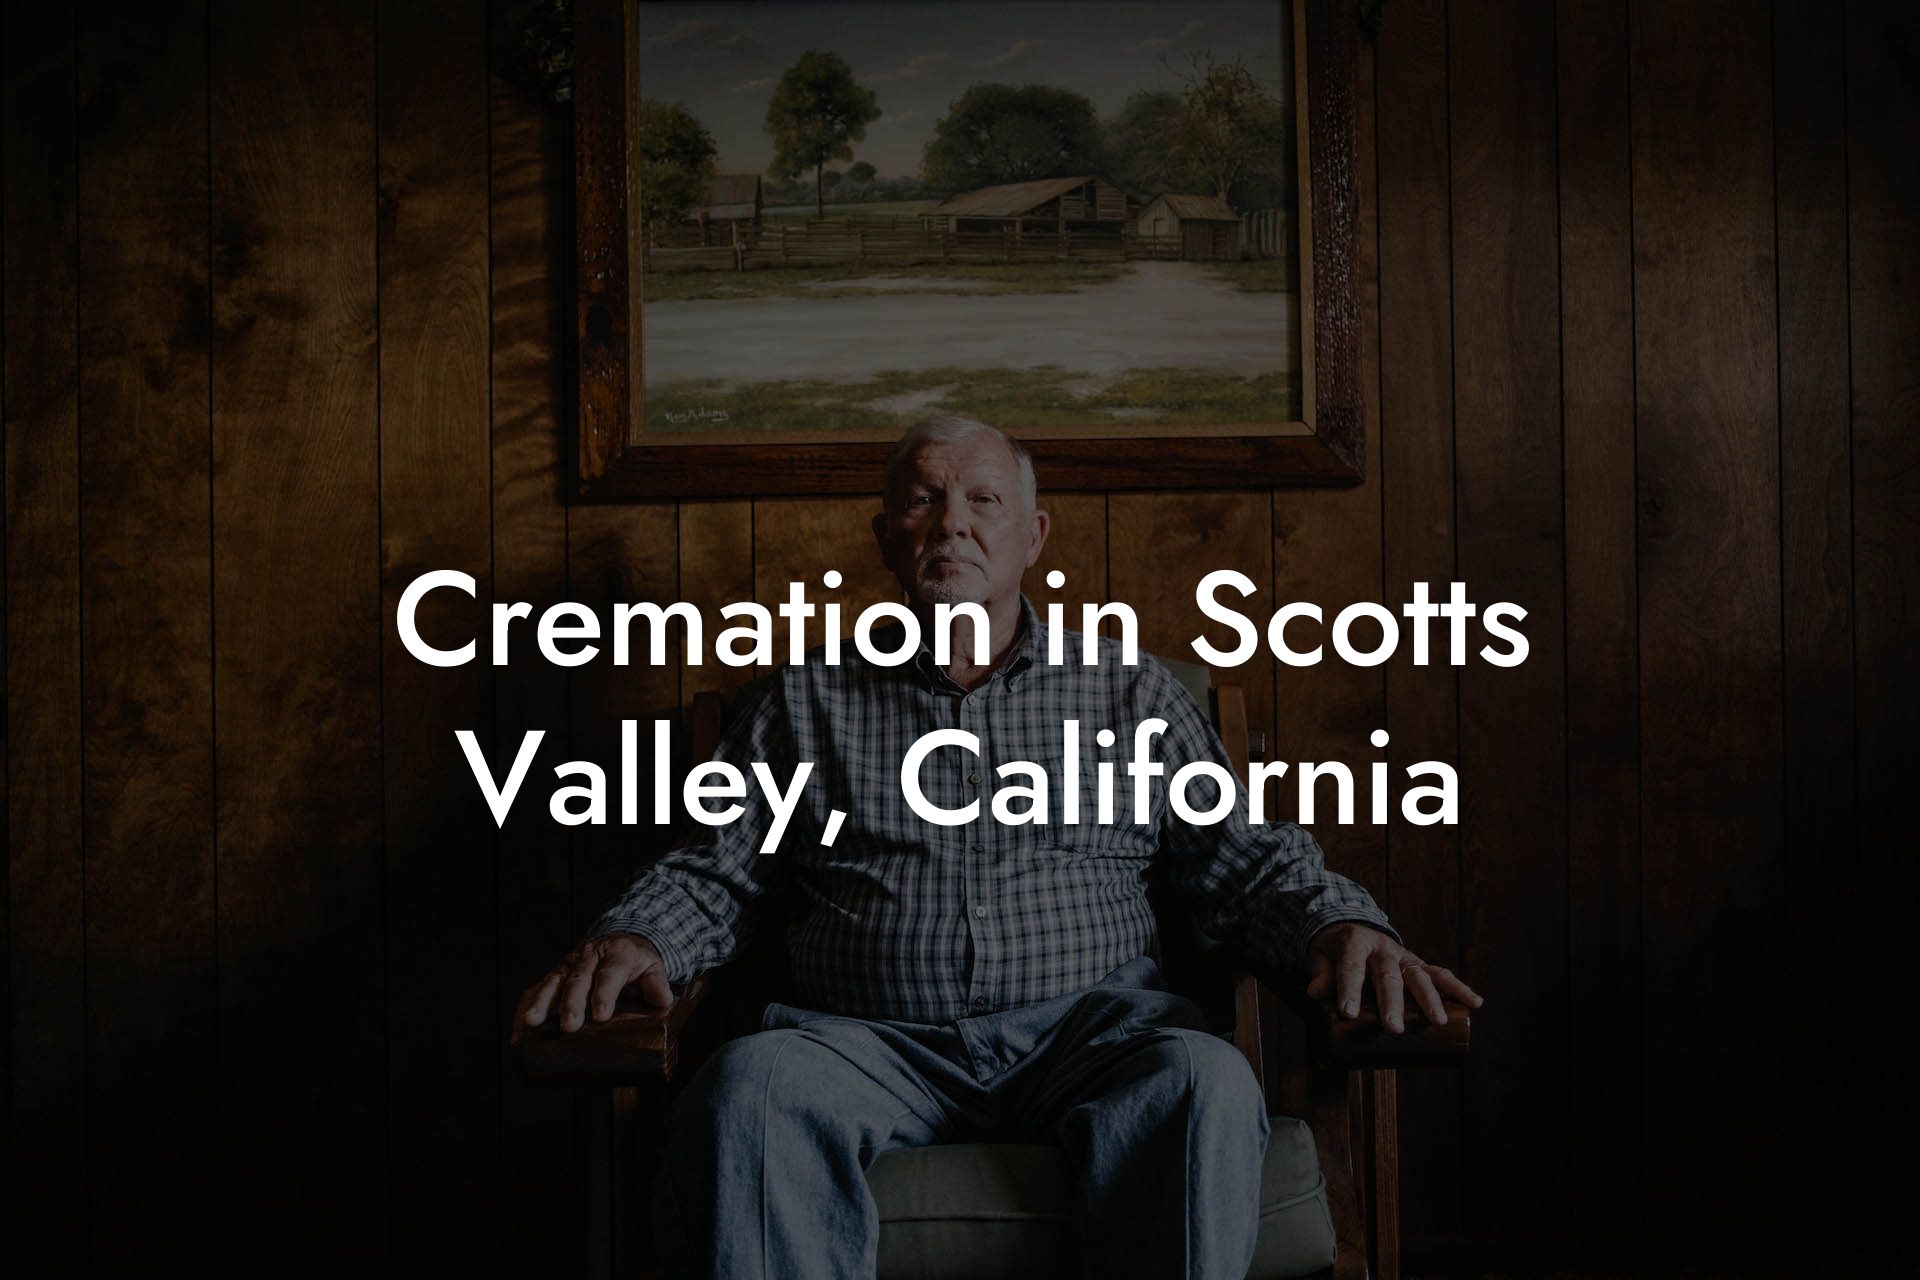 Cremation in Scotts Valley, California